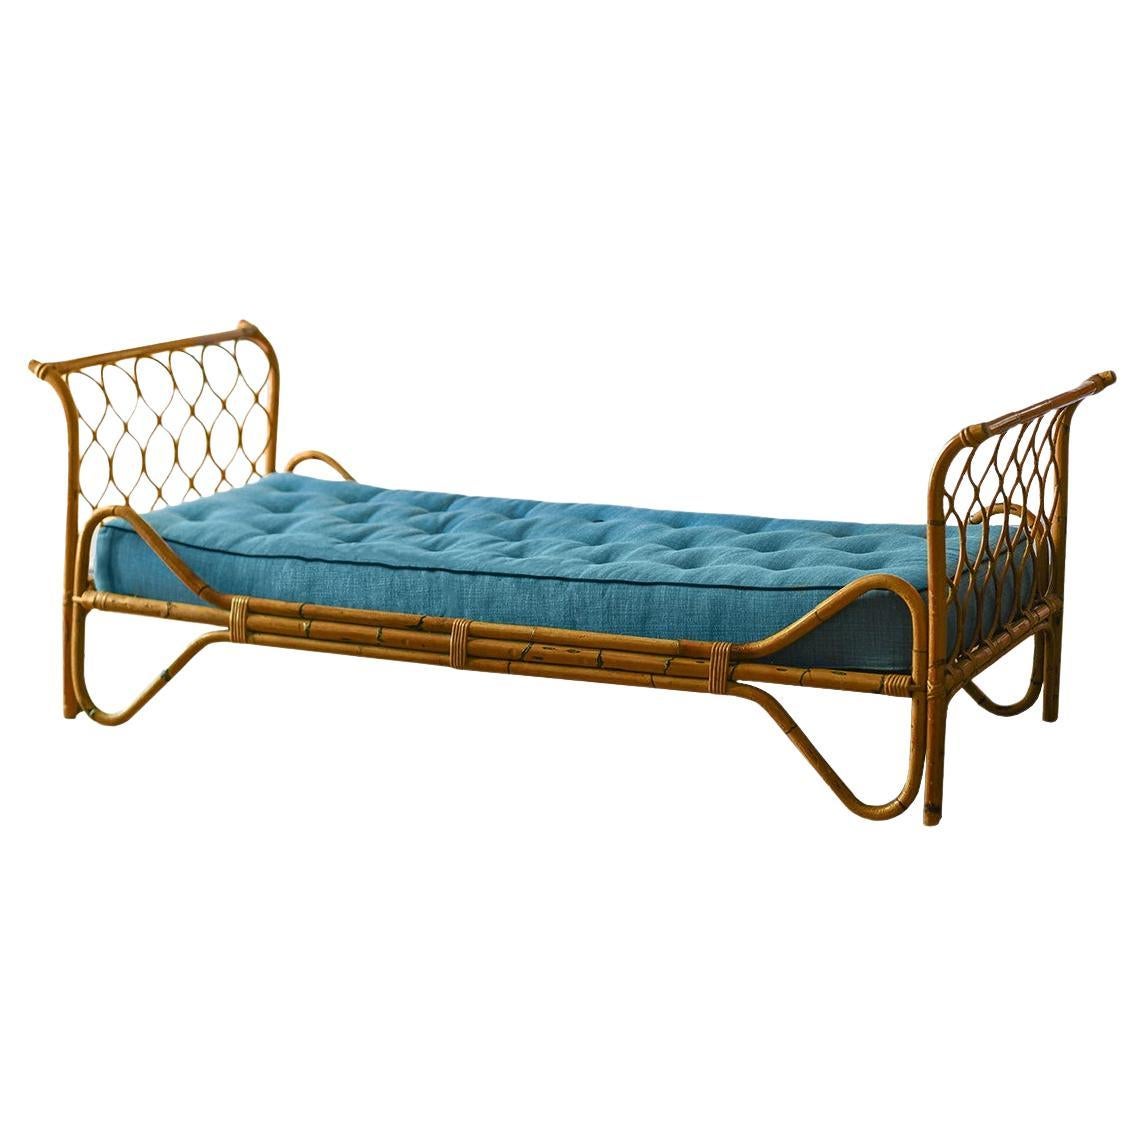 Bamboo  Day Bed from 1960s complete with cushion.